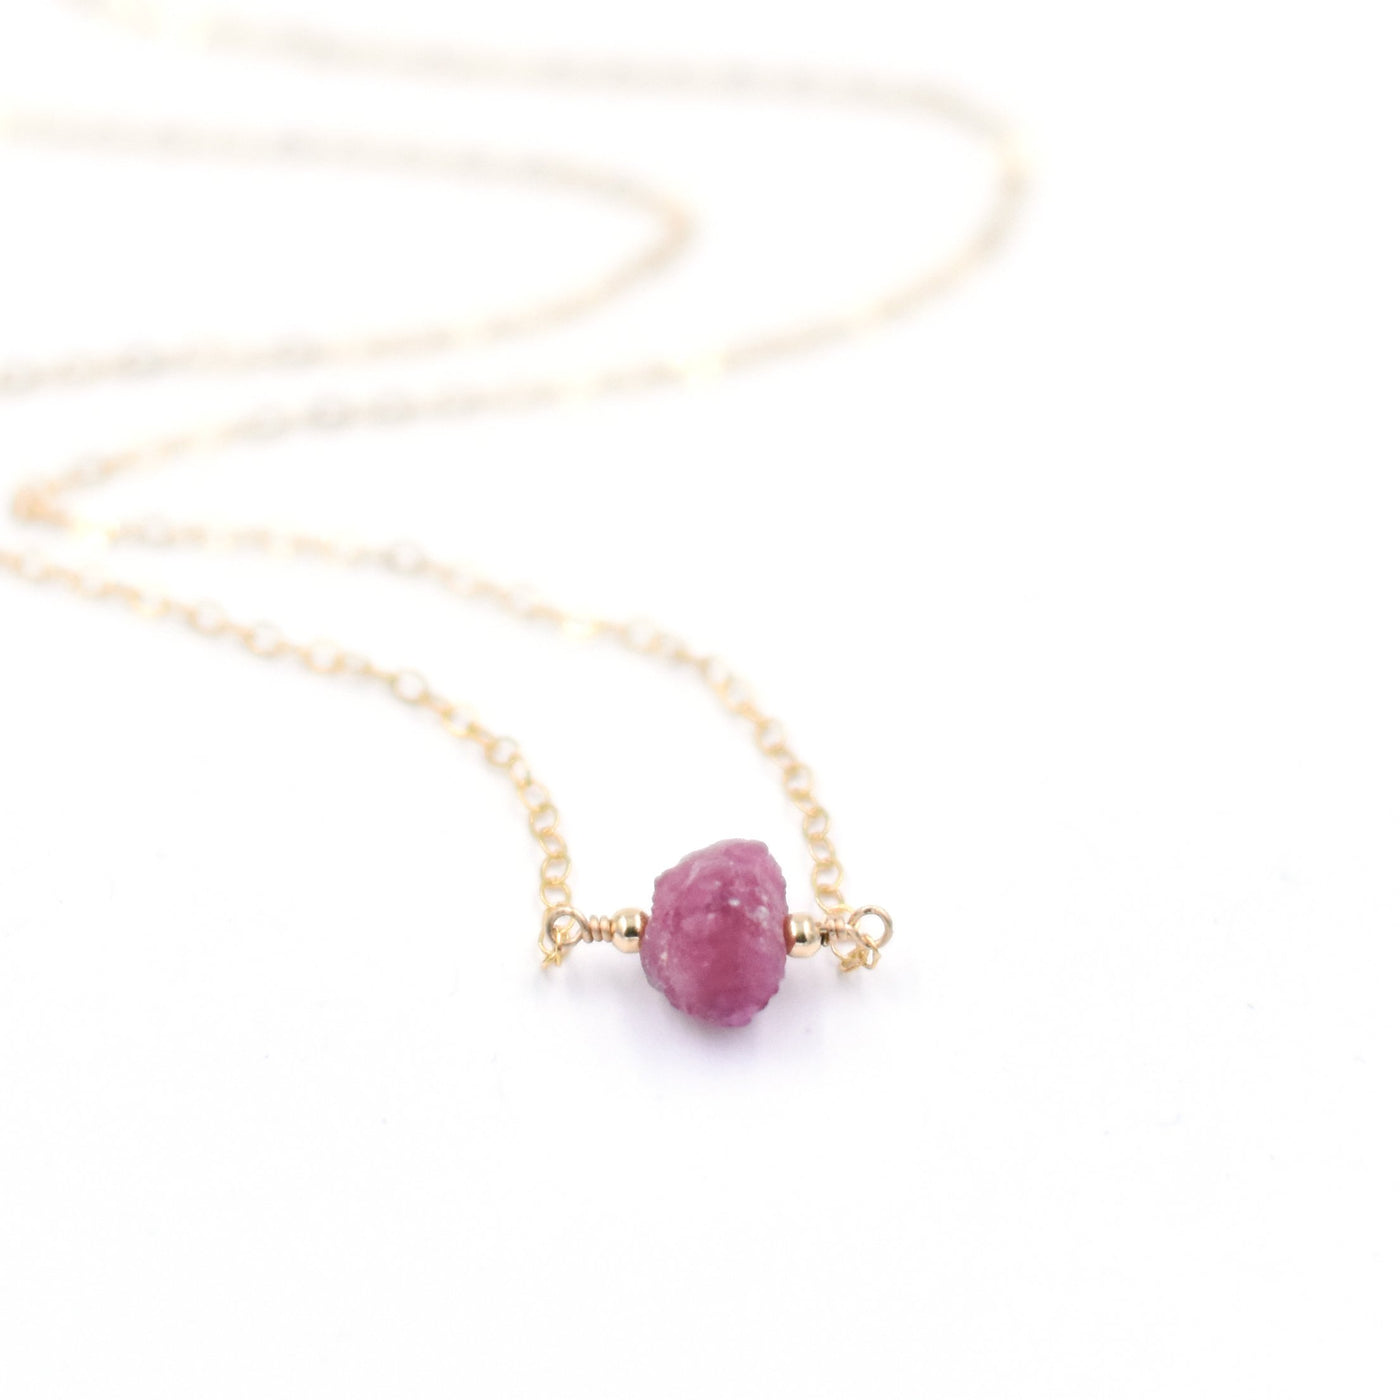 Topaz & Pearl Necklaces 14k Yellow Gold Fill / Single Pink Tourmaline Organic Stone Necklace